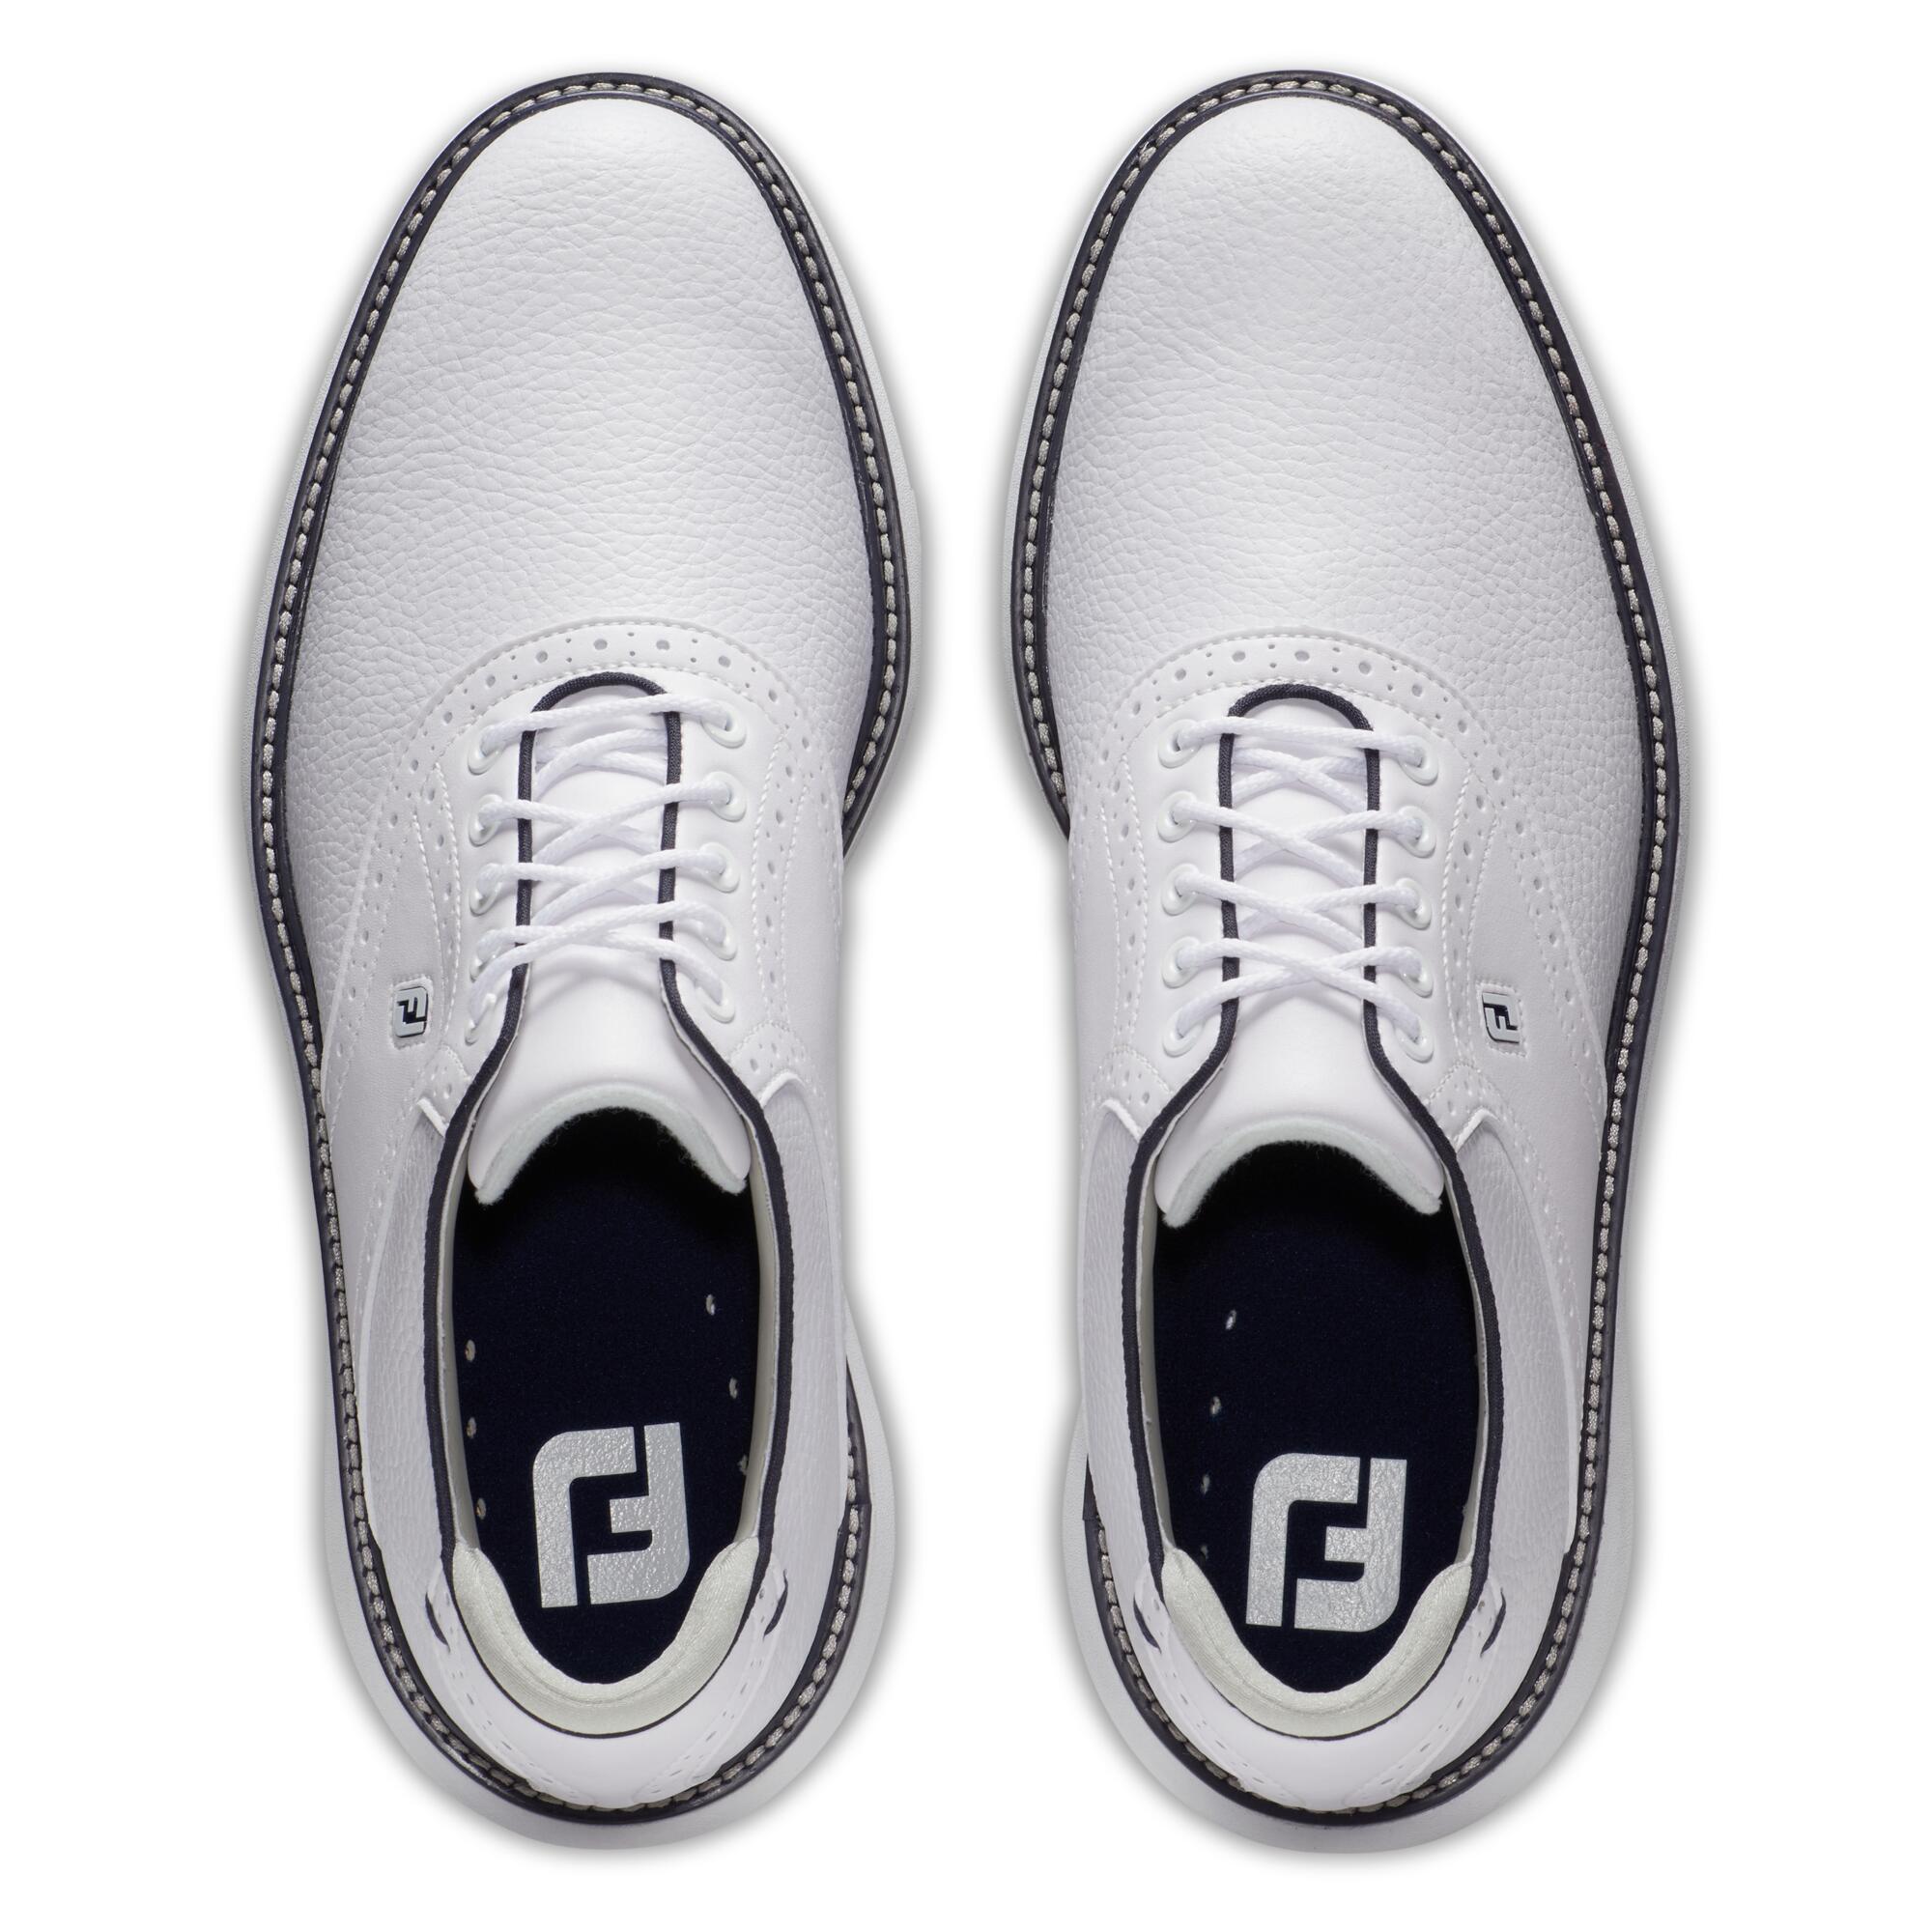 Men's golf spikeless shoes Footjoy - Traditions white 3/6